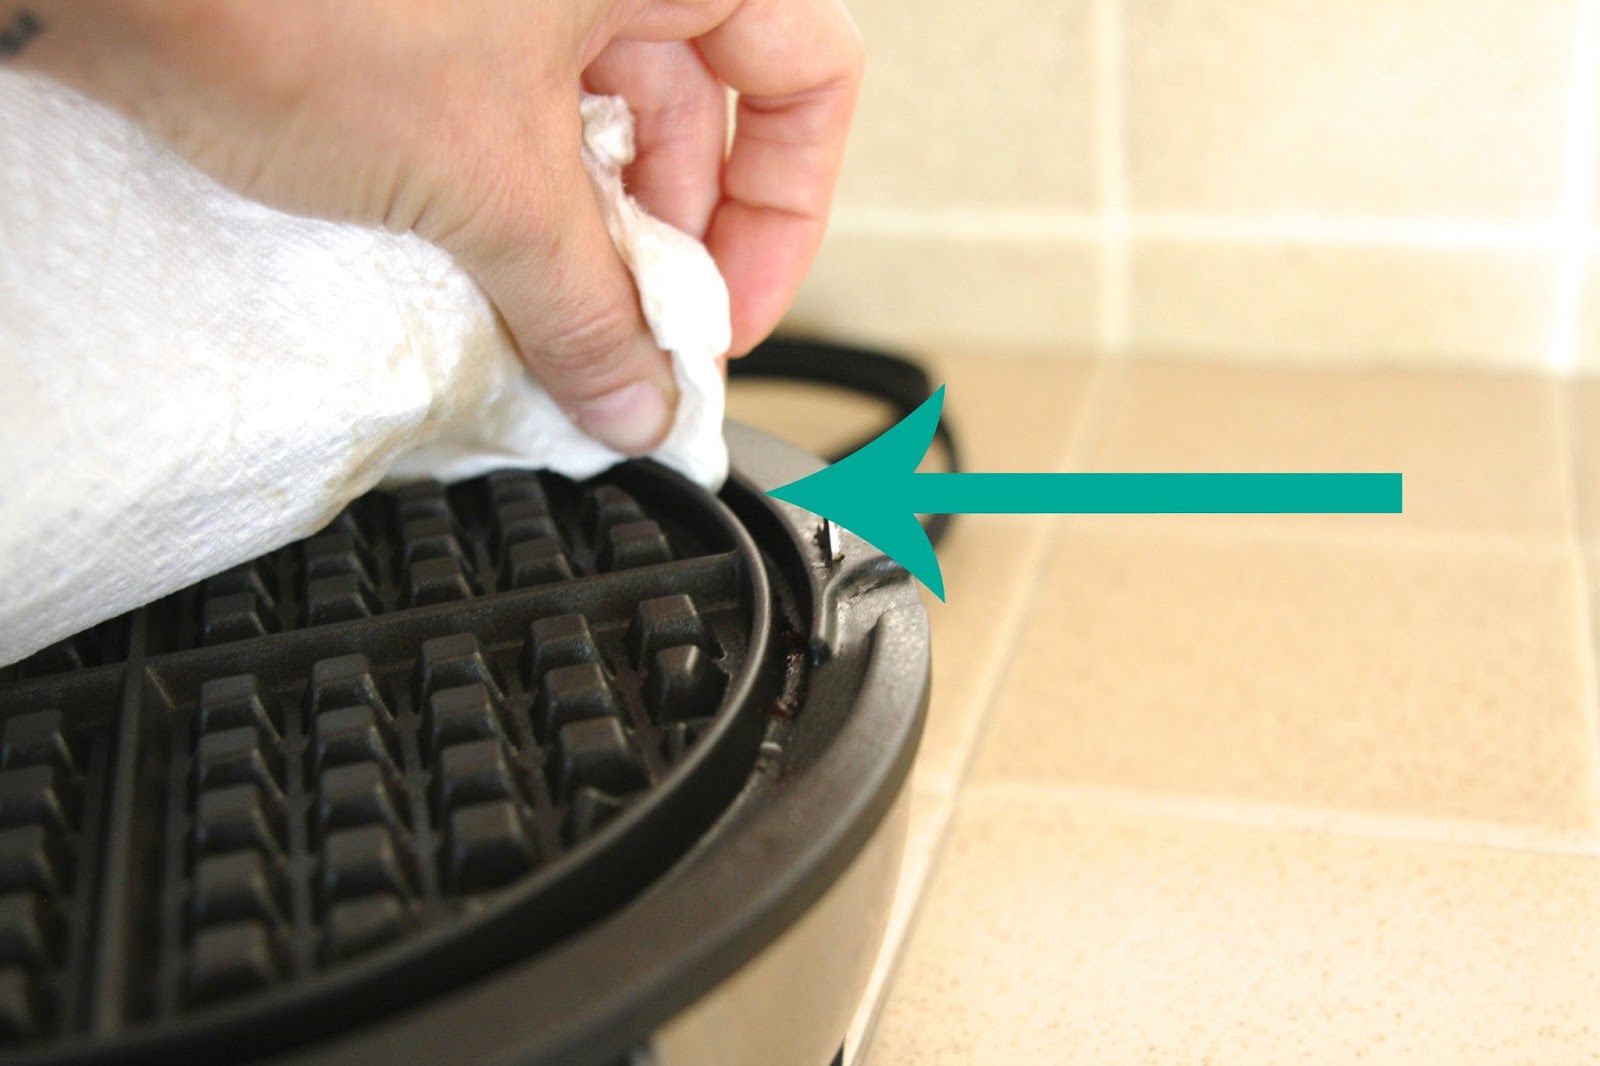 How To Clean a Waffle Iron with Non-Removable Plates - Simply Organized